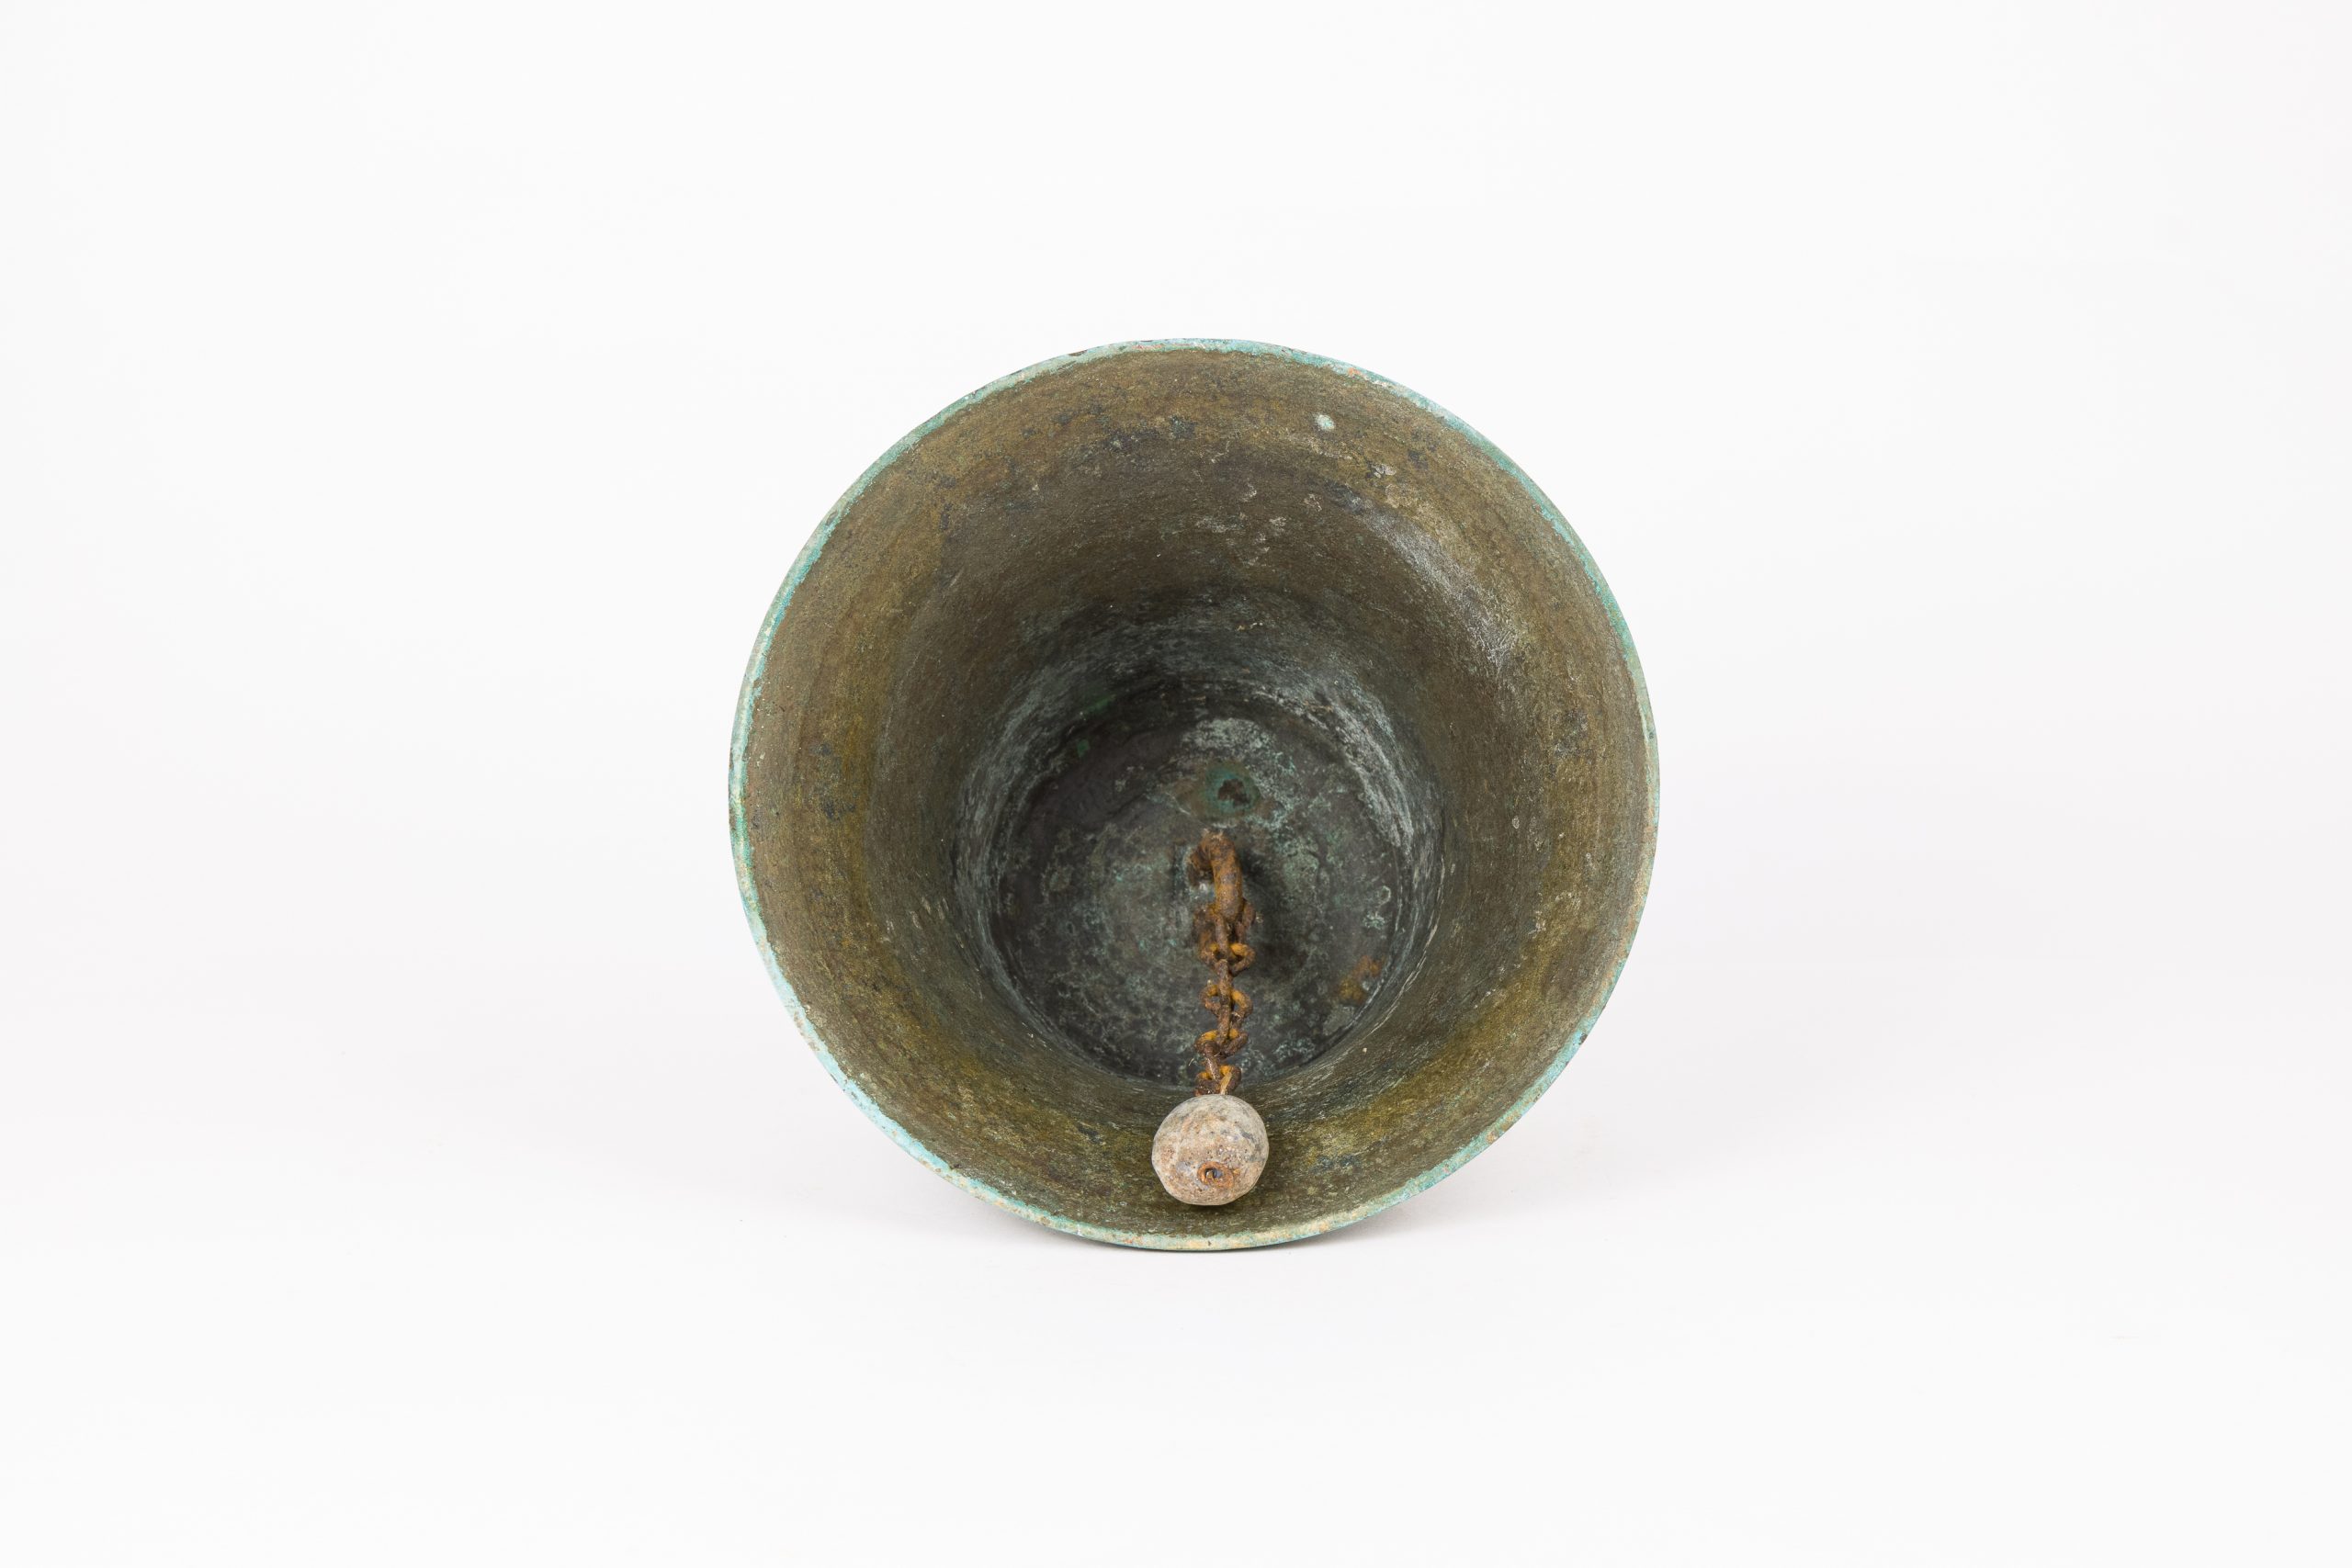 Underside of brassy metal bell with green oxidisation and a rusty ringer.